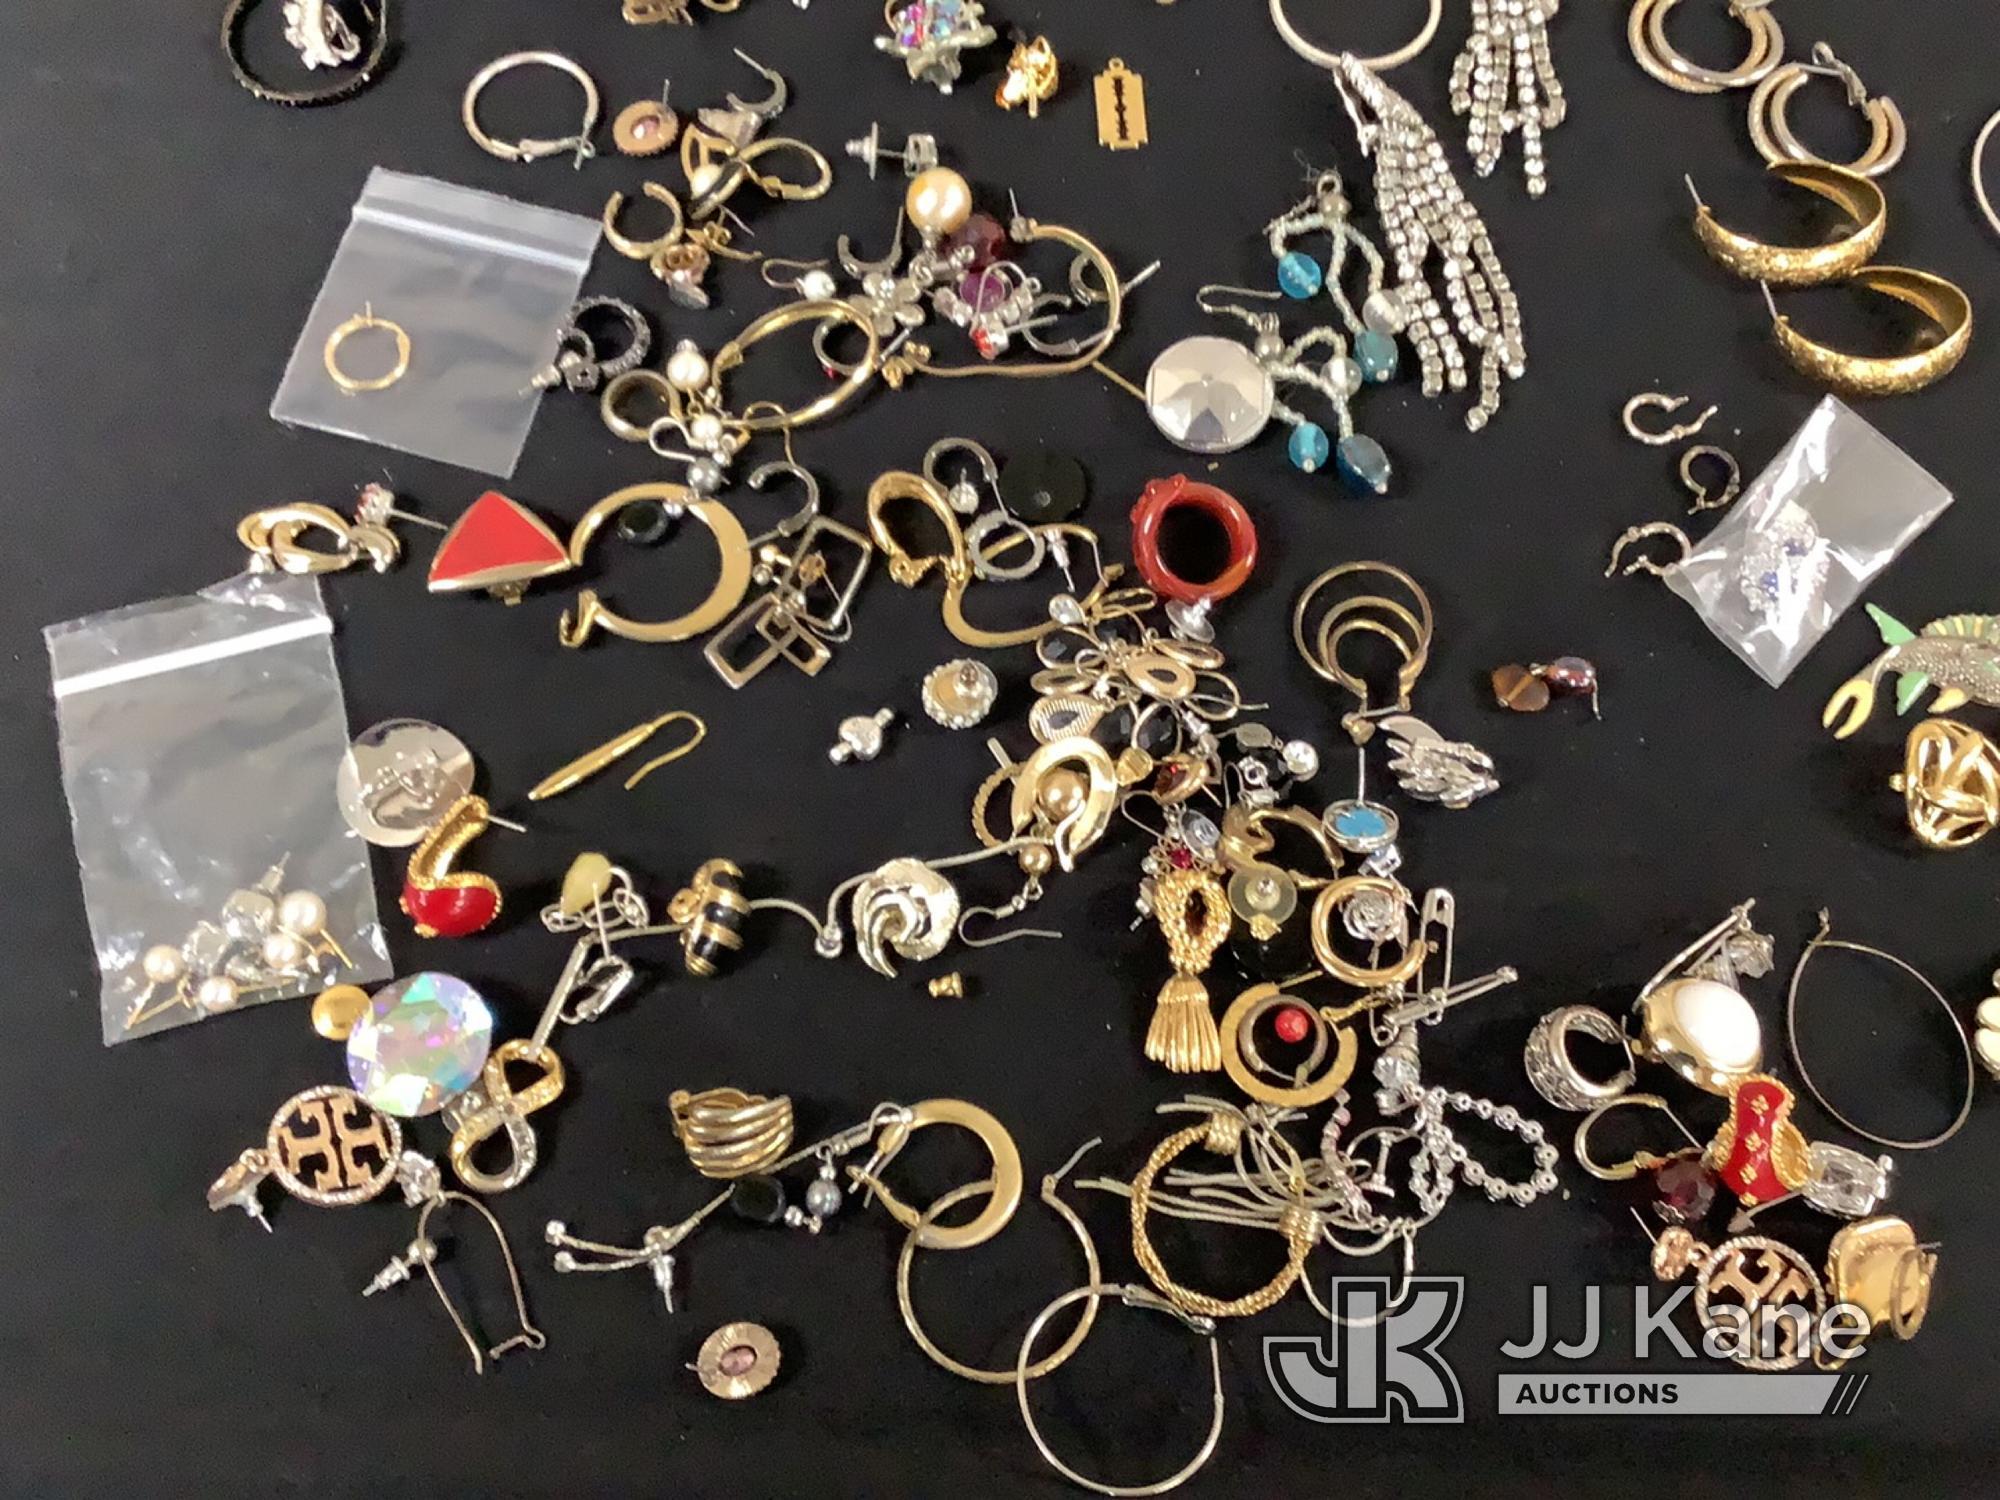 (Jurupa Valley, CA) Mixed jewelry | possibly costume jewelry | authenticity unknown (Used) NOTE: Thi